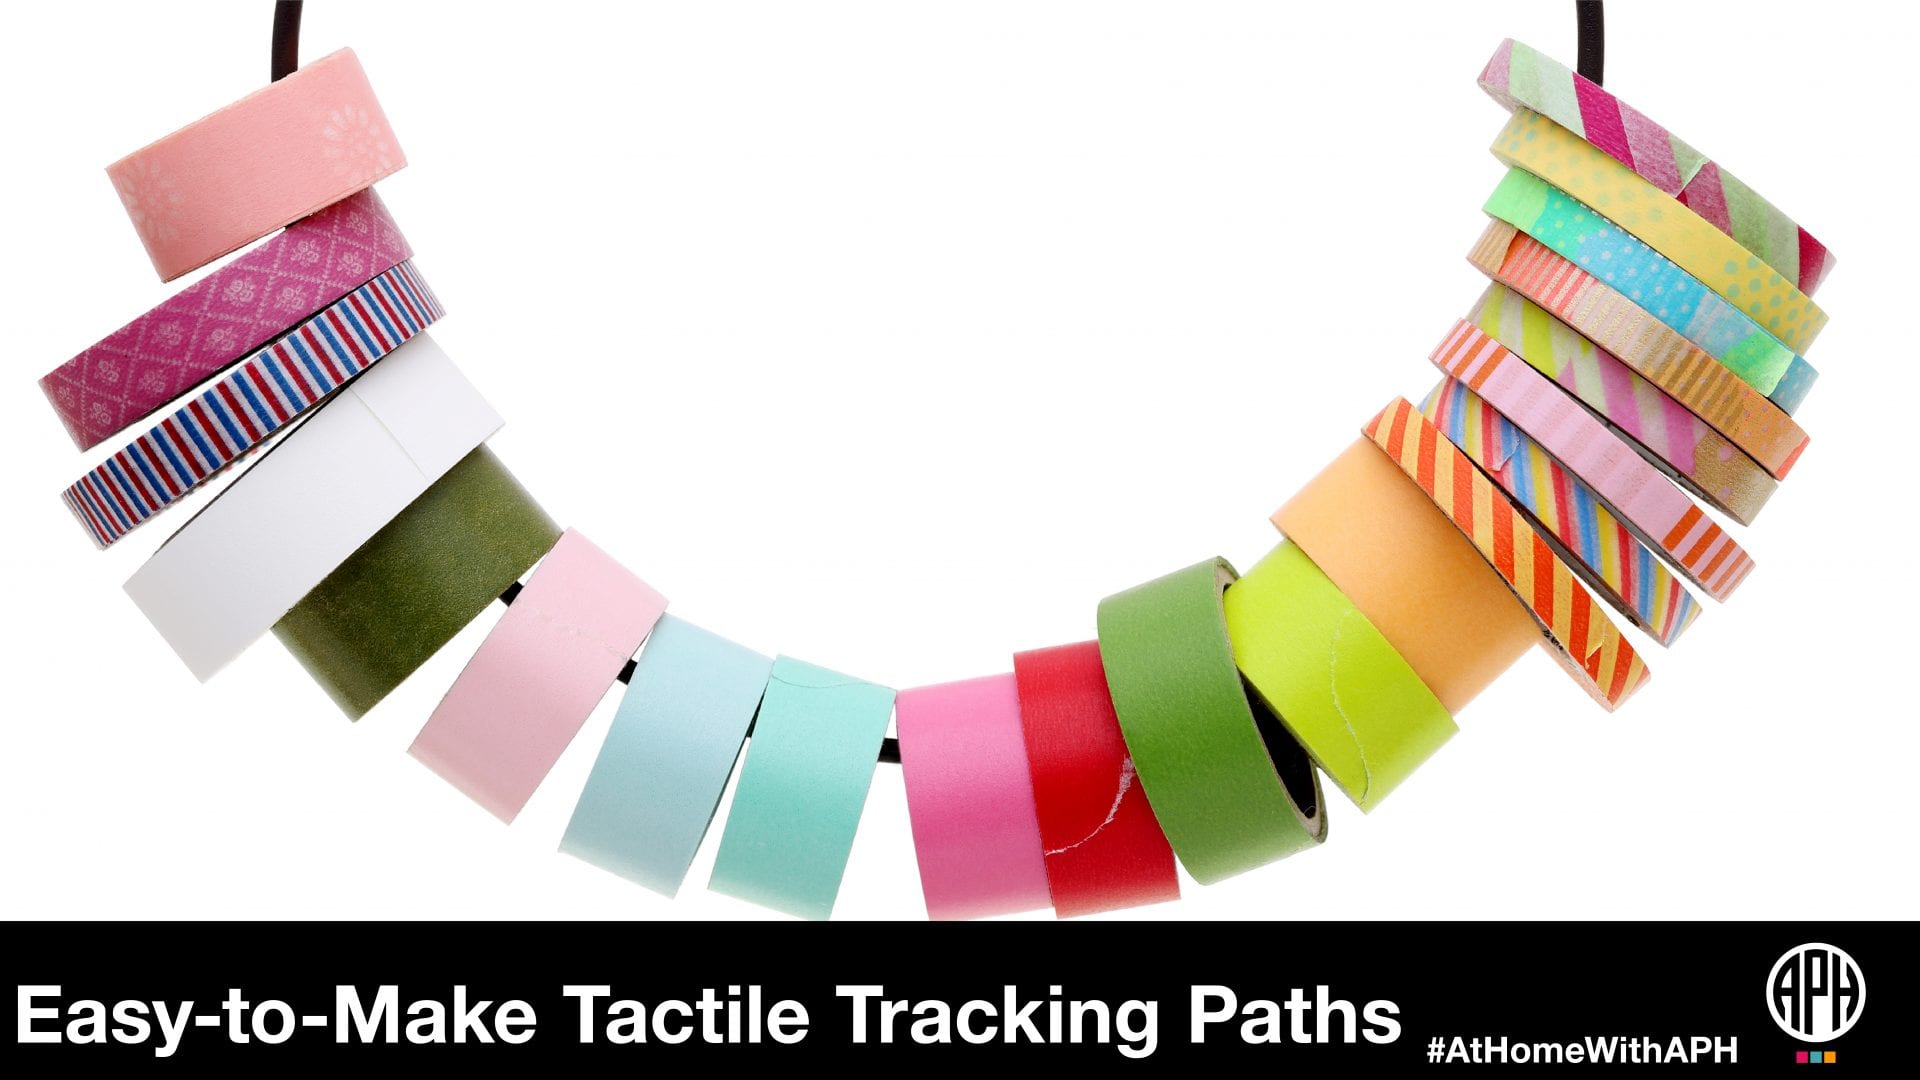 a variety of tape rolls on a white background. text reads "easy to make tactile tracking paths #AtHomeWithAPH"